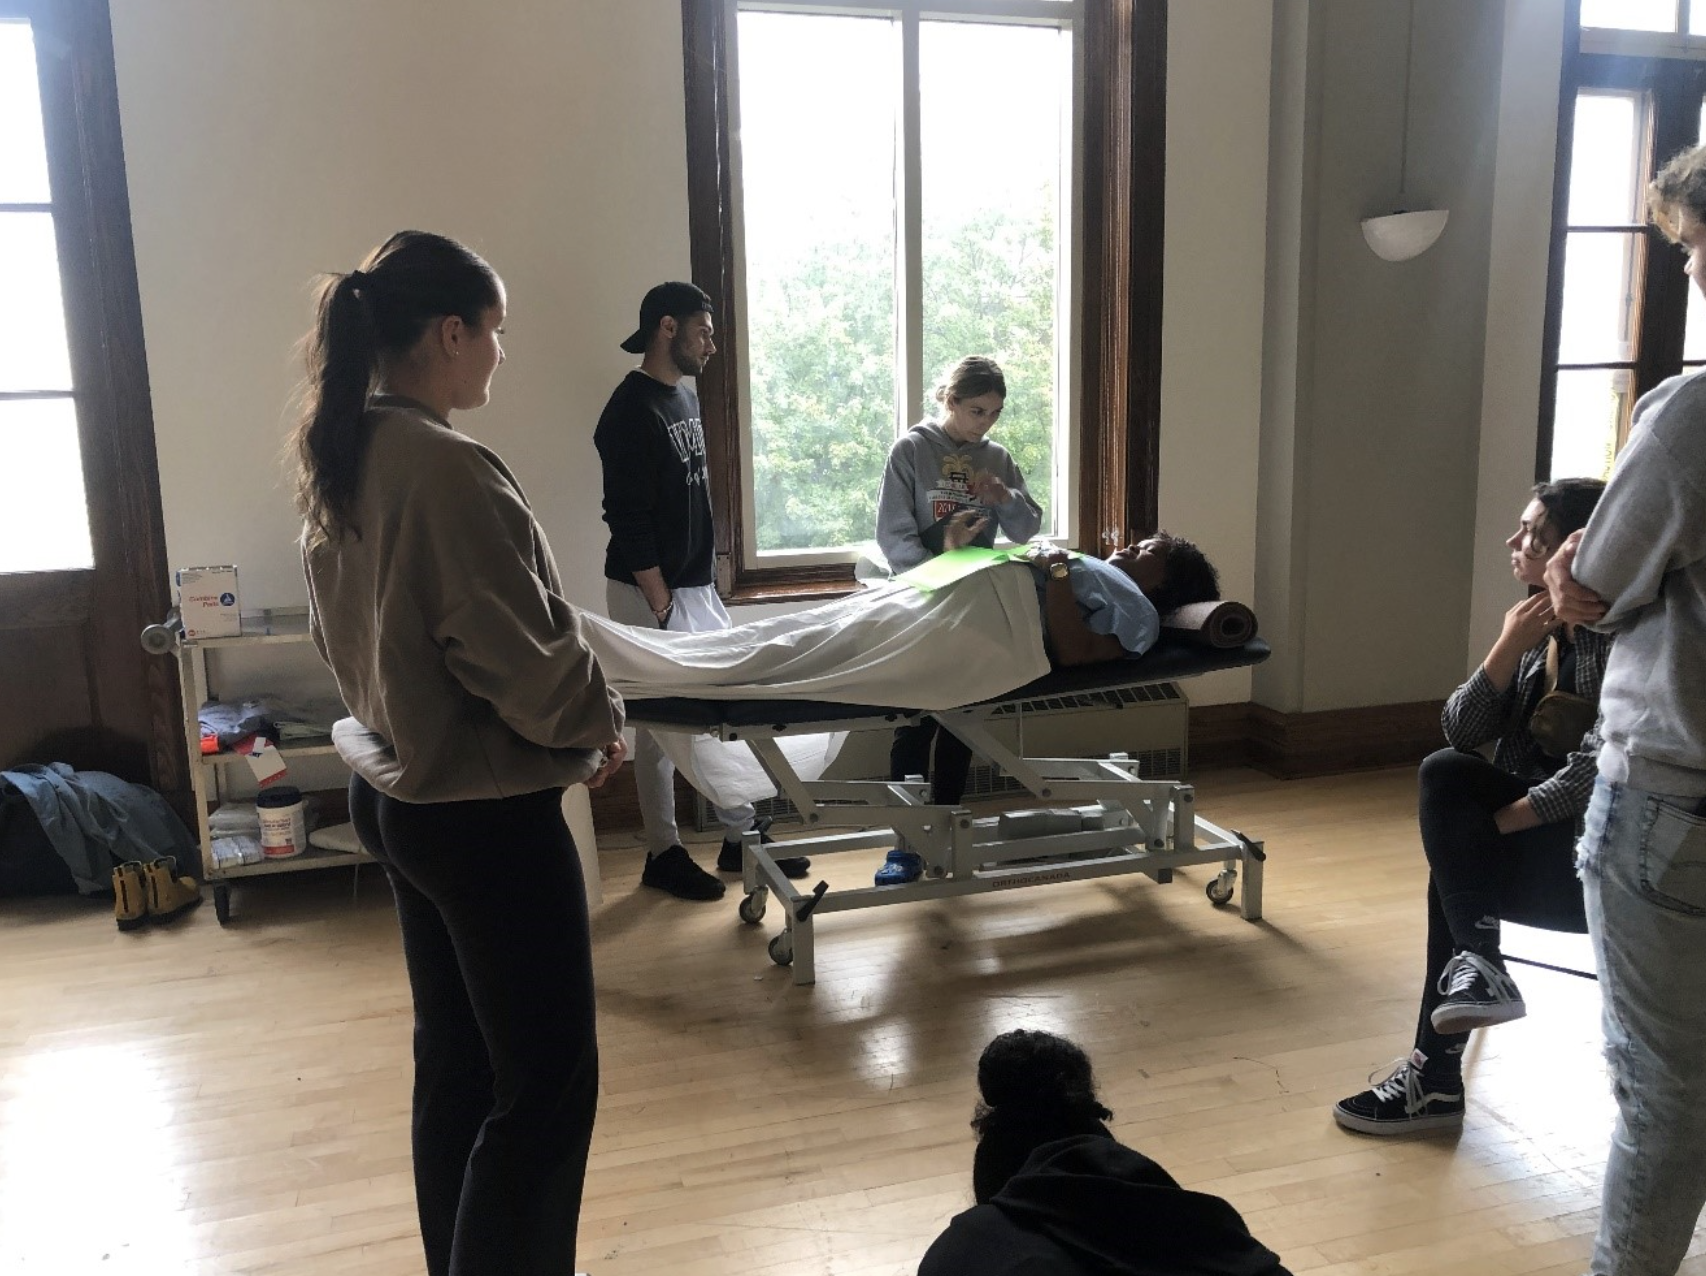 In a classroom with big windows, a female college student is standing beside a stretcher. On the stretcher is another female, dressed in a hospital gown and role-playing a patient. The student appears to be listening or talking to the patient. 5 college students, one of which is sitting down while the others are standing up, are observing the scene.